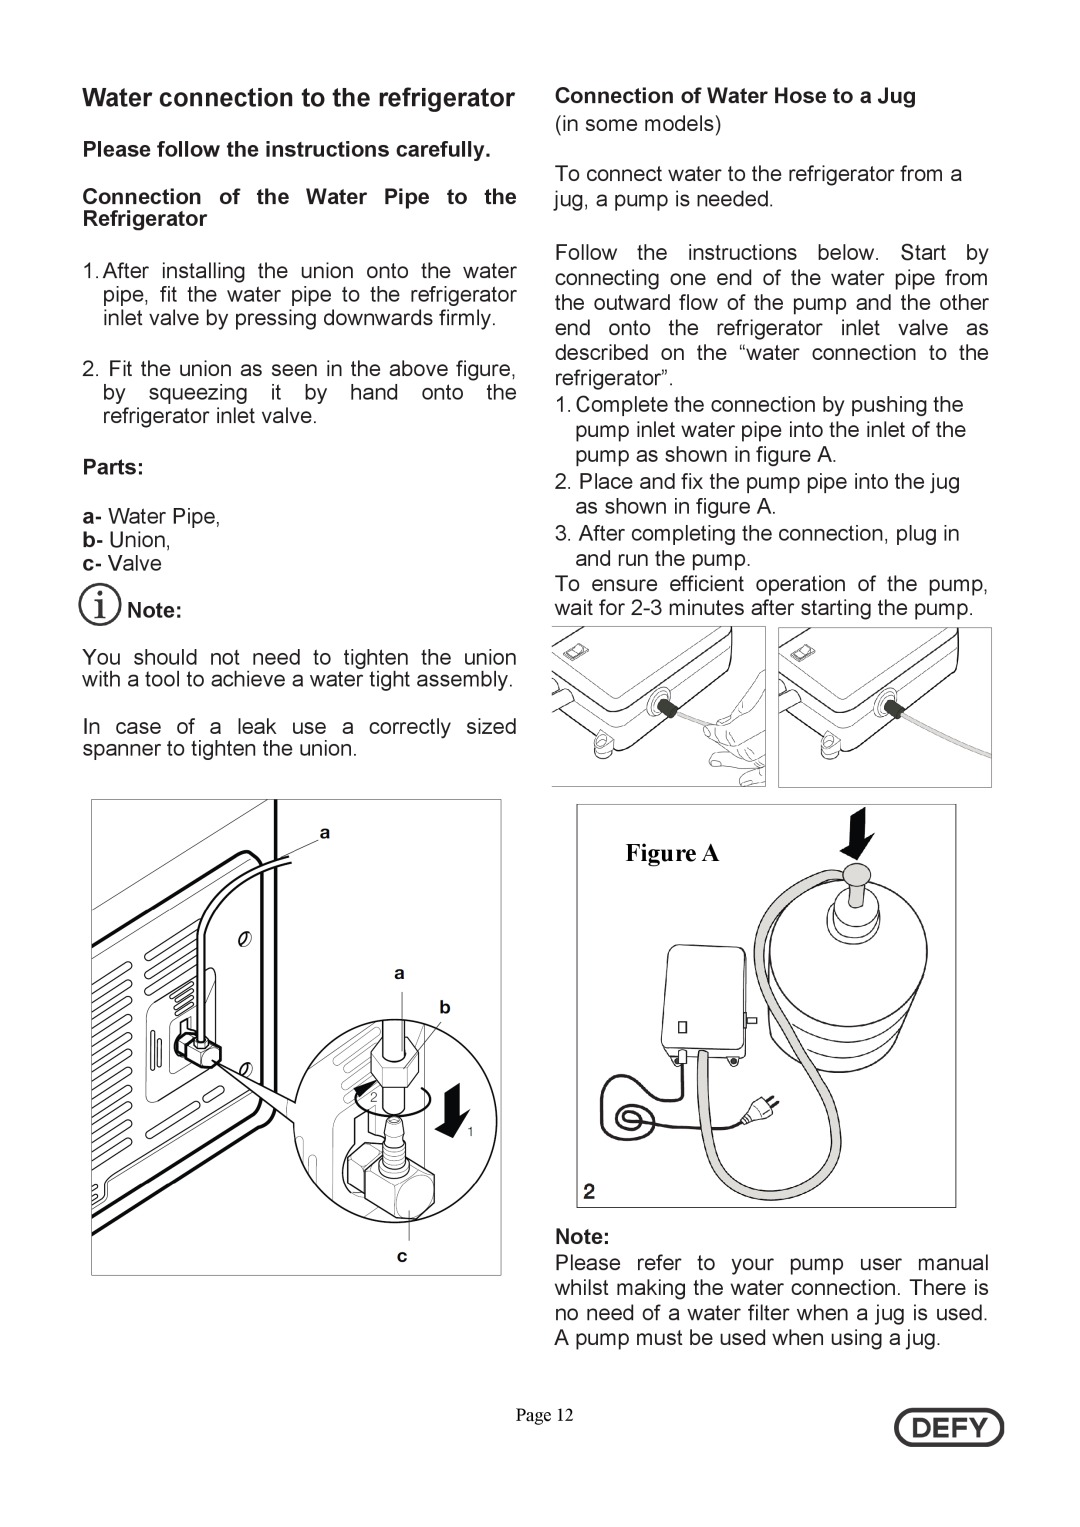 Defy Appliances DFF399 Water connection to the refrigerator, Please follow the instructions carefully, Parts 